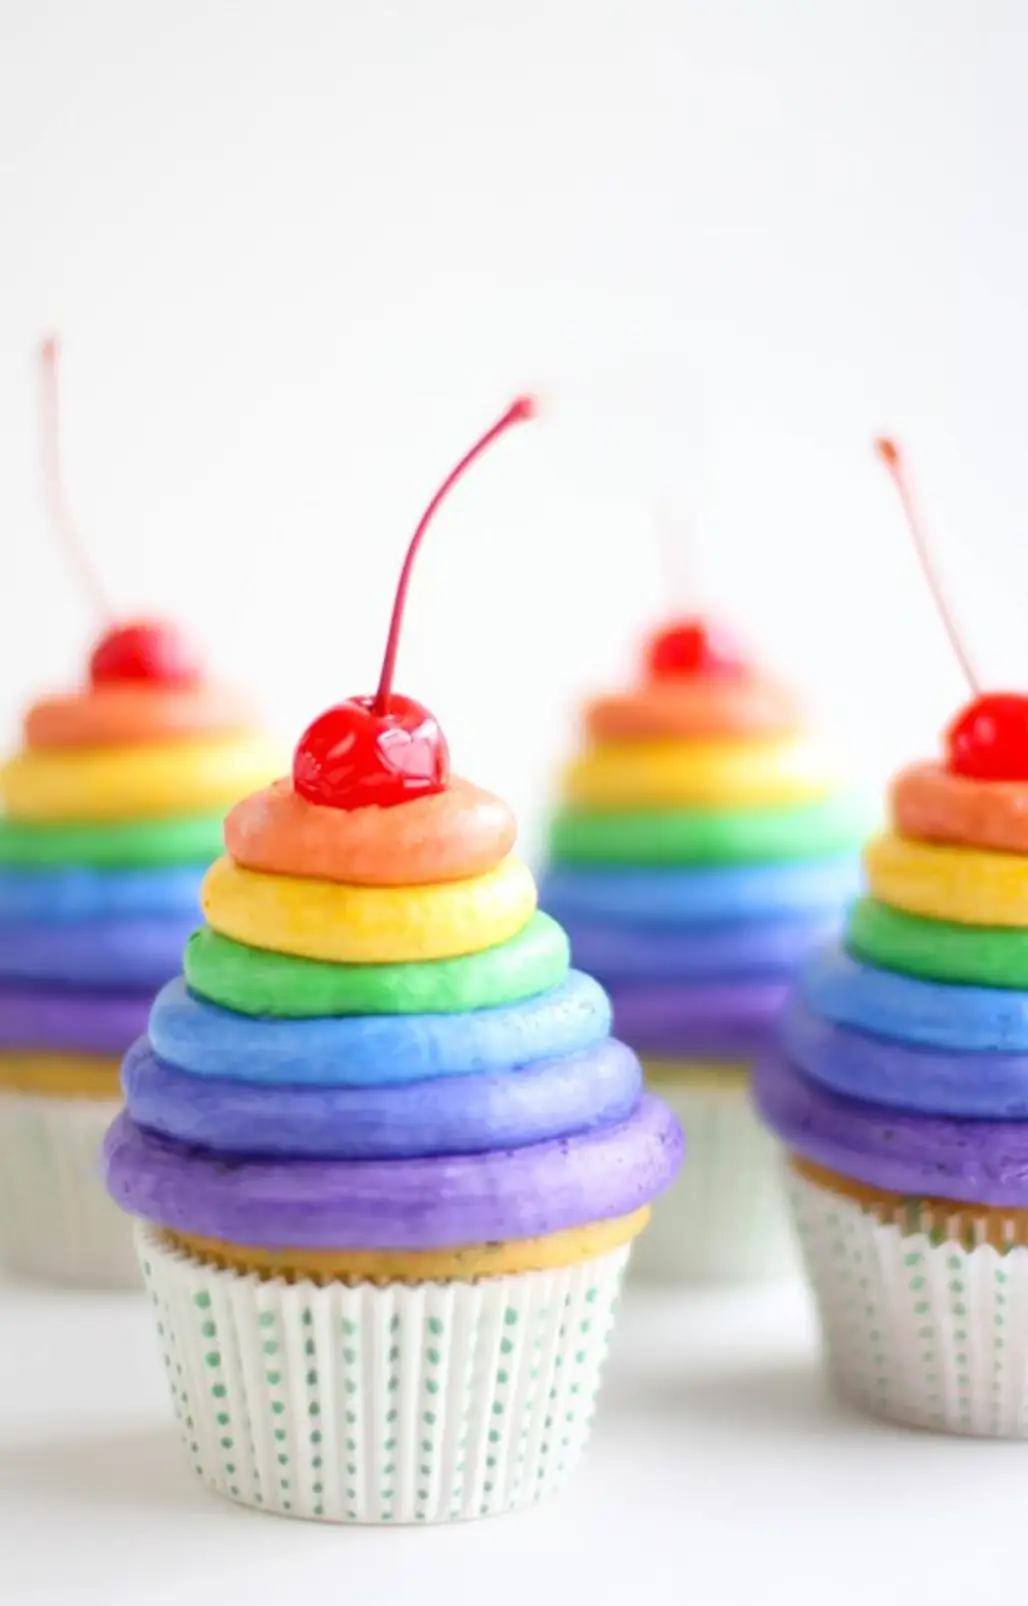 Cupcakes with Mounds of Rainbow Frosting